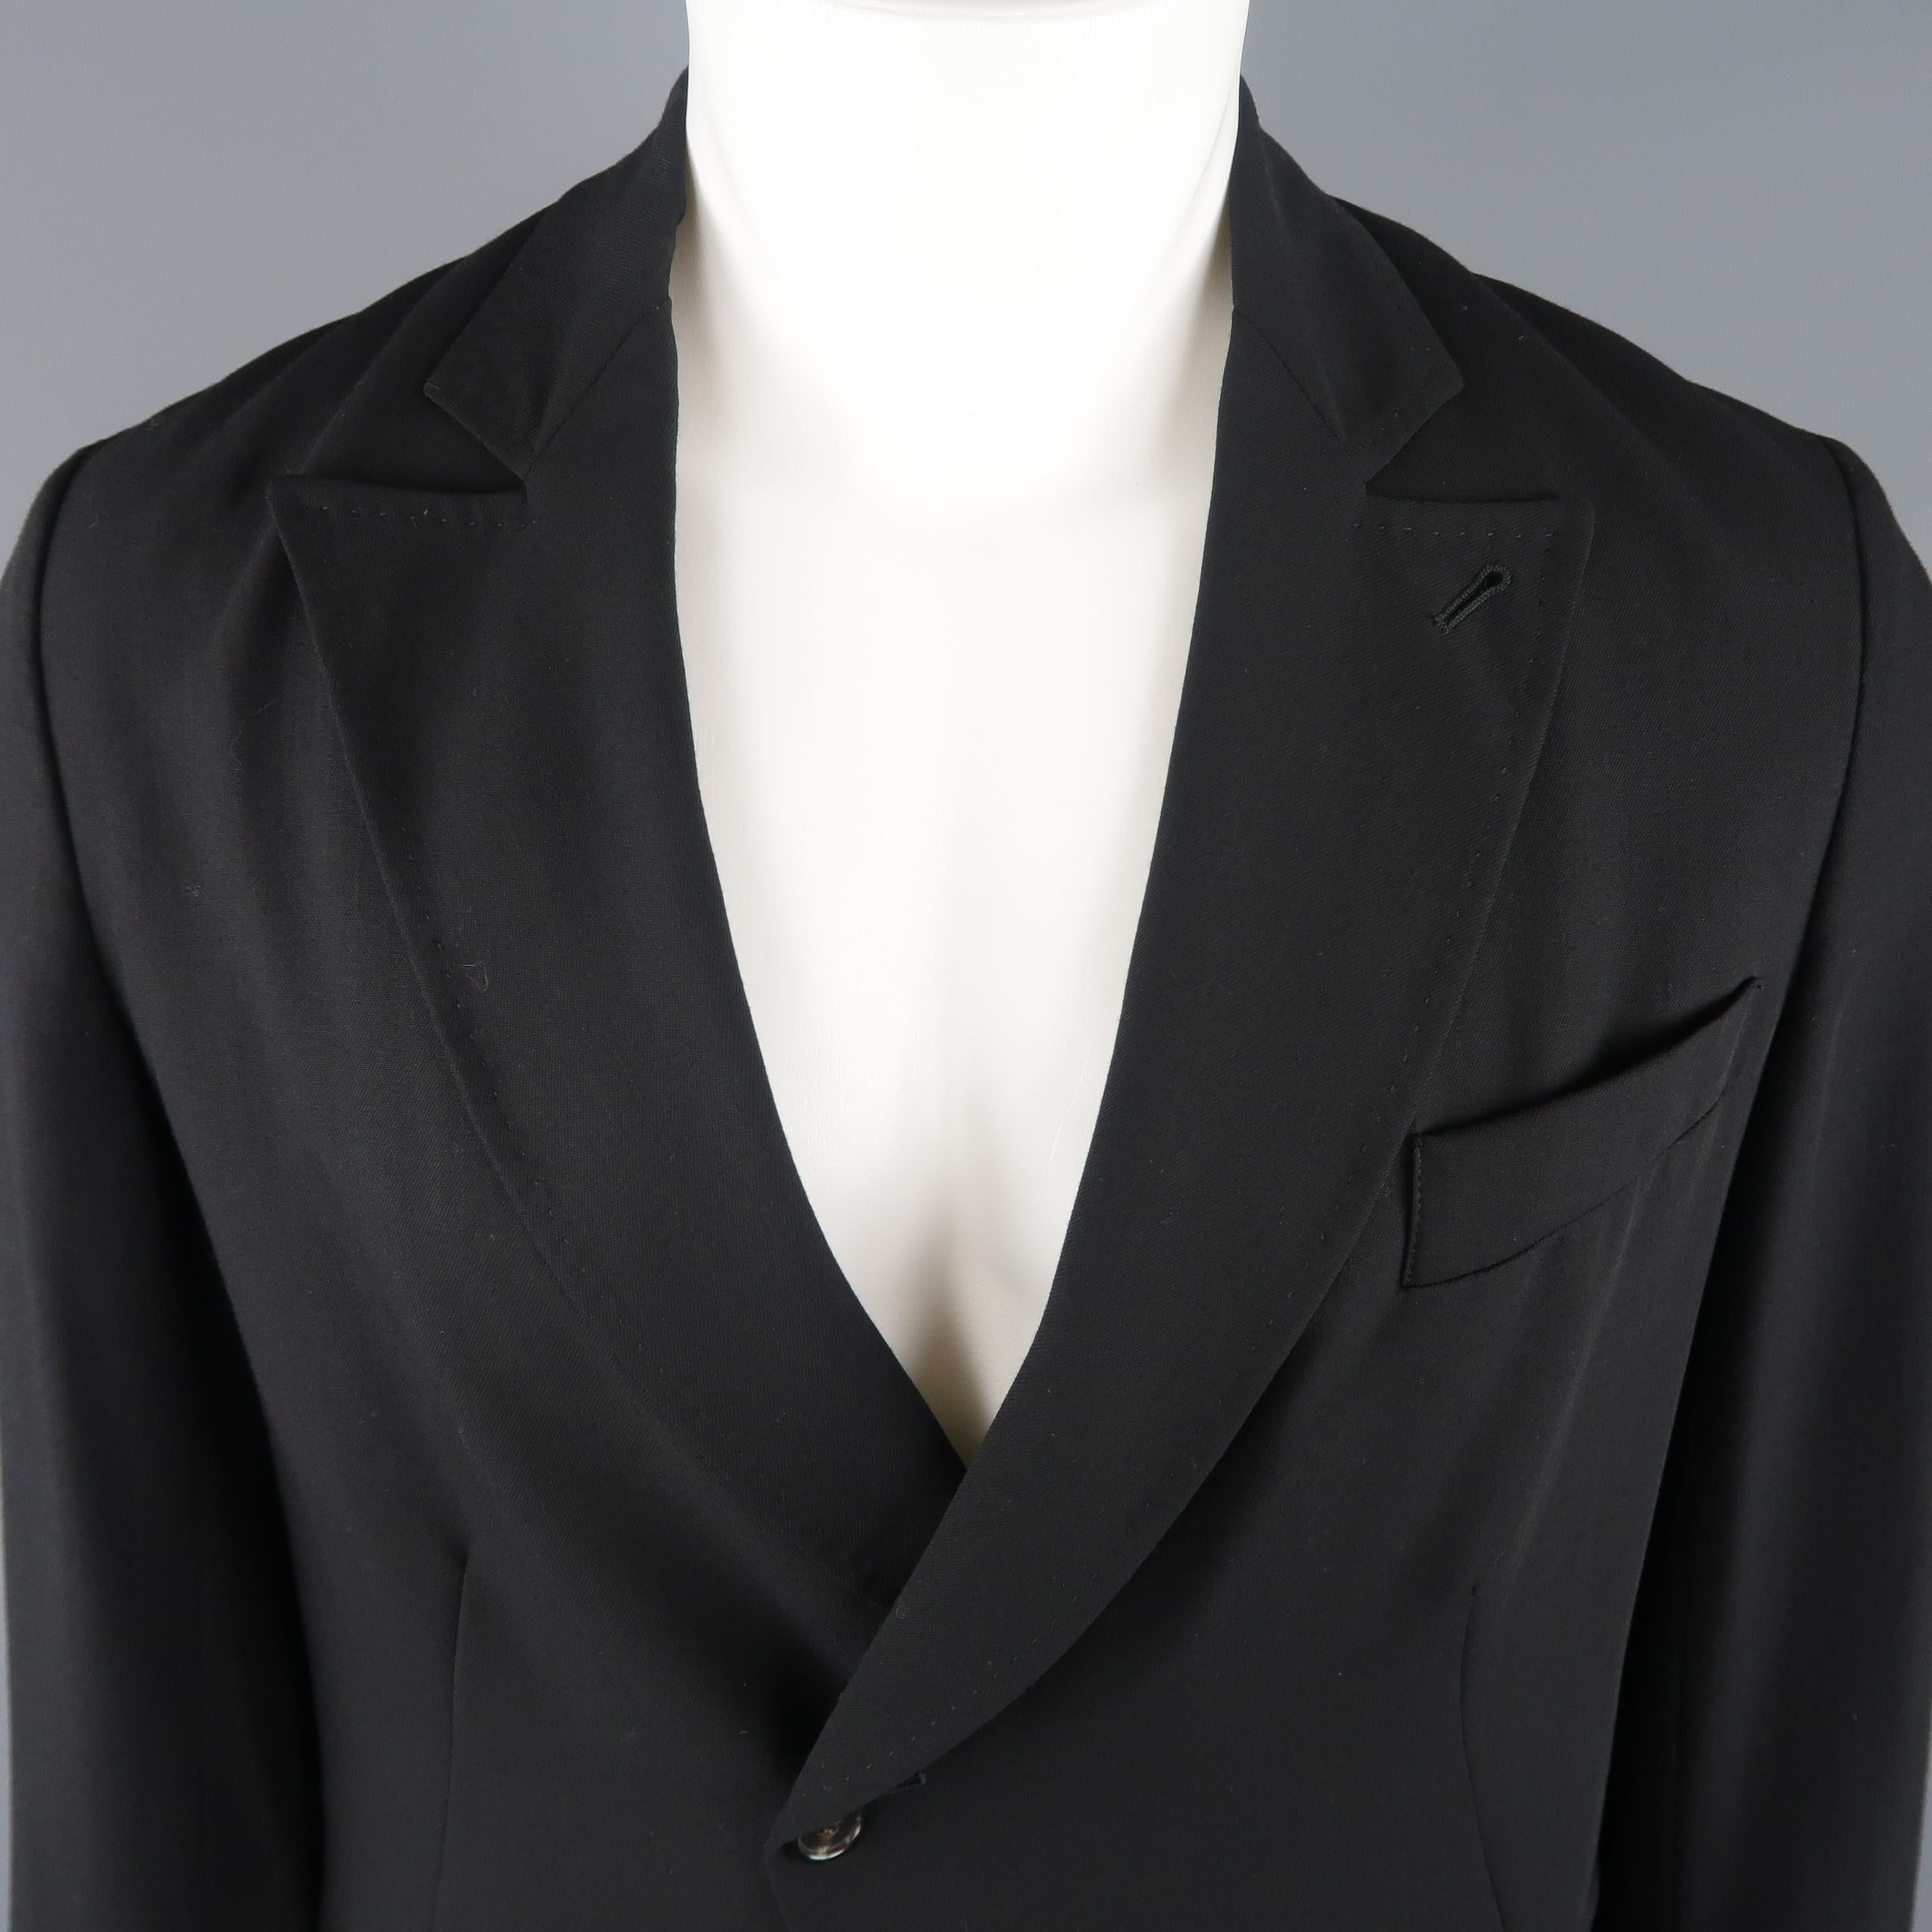 ANN DEMEULEMEESTER jacket comes in an ultra light weight sheer wool twill with a peak lapel, boxy silhouette, cropped hem, and two button front.  Made in Italy.
 
Excellent Pre-Owned Condition.
Marked: XXS
 
Measurements:
 
Shoulder: 18 in.
Chest: